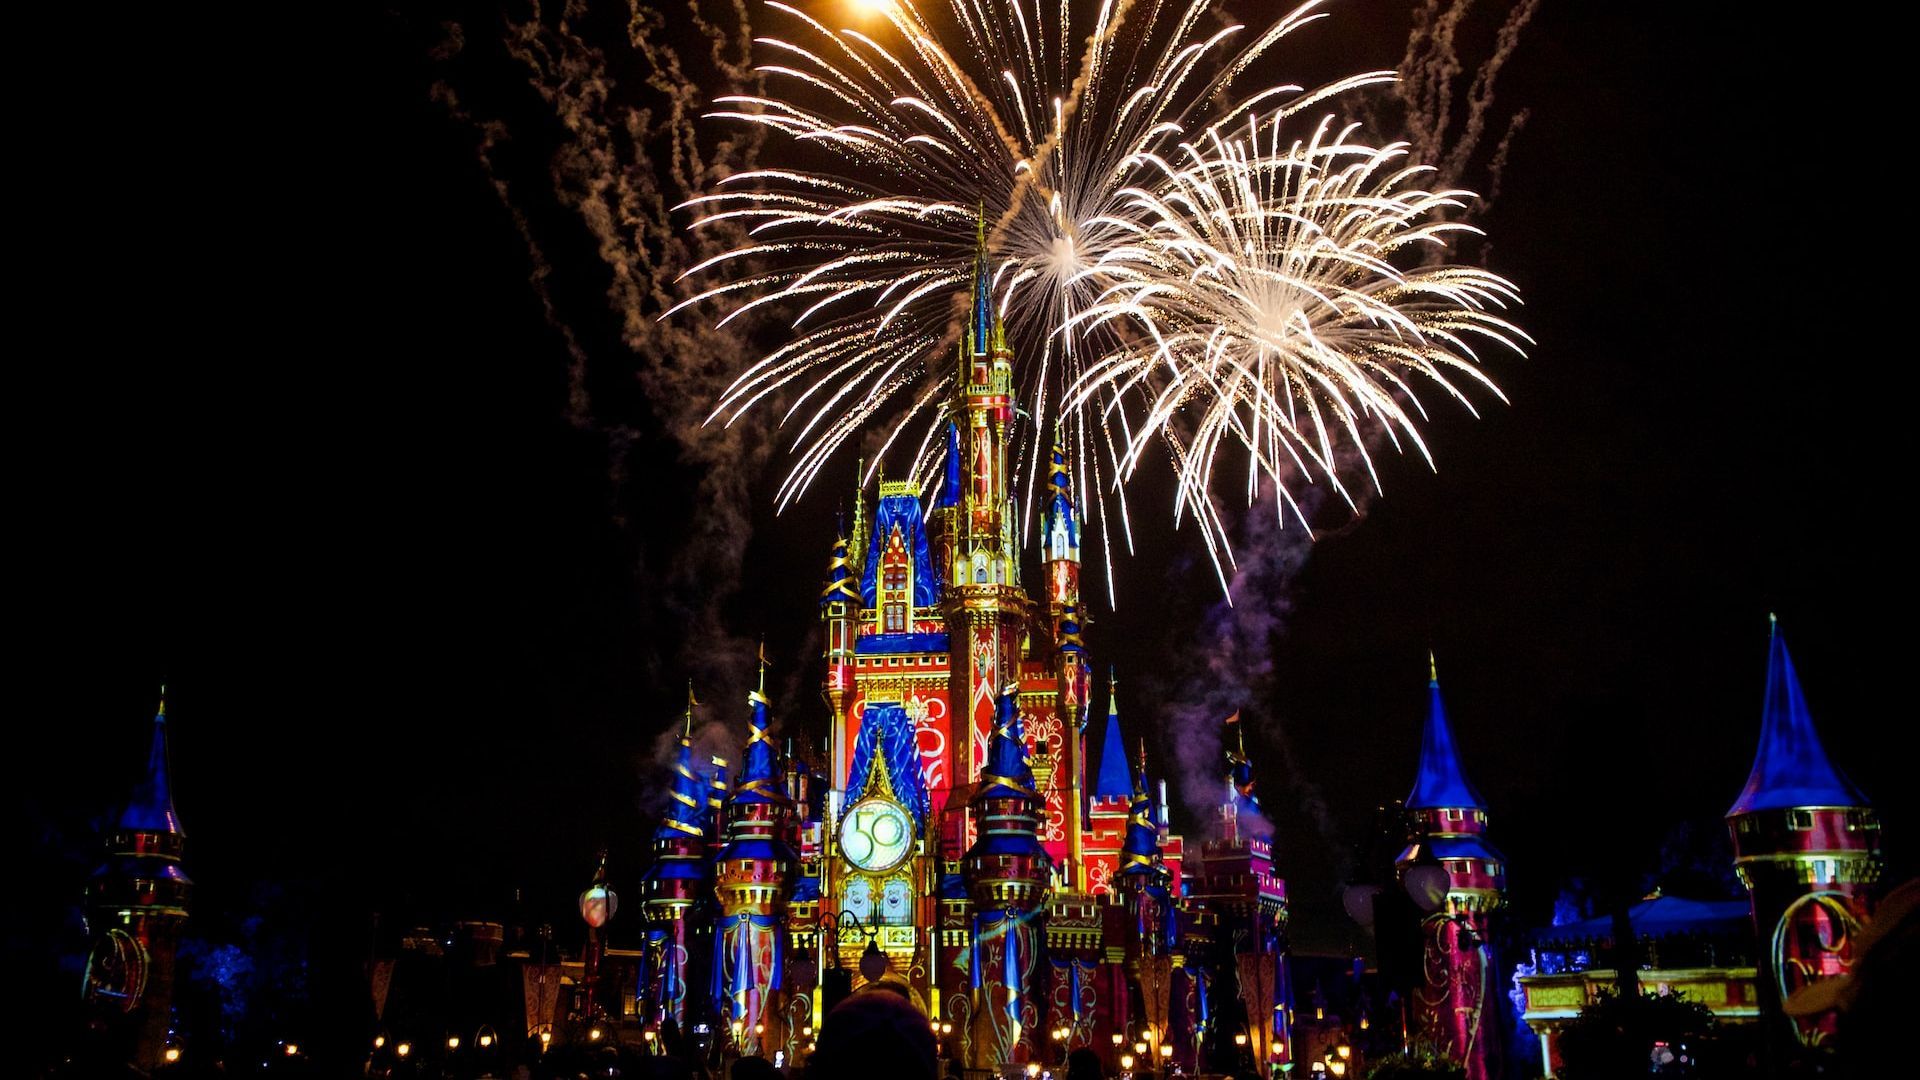 Walt Disney World Increases Its Entry Prices Ahead of the Holidays